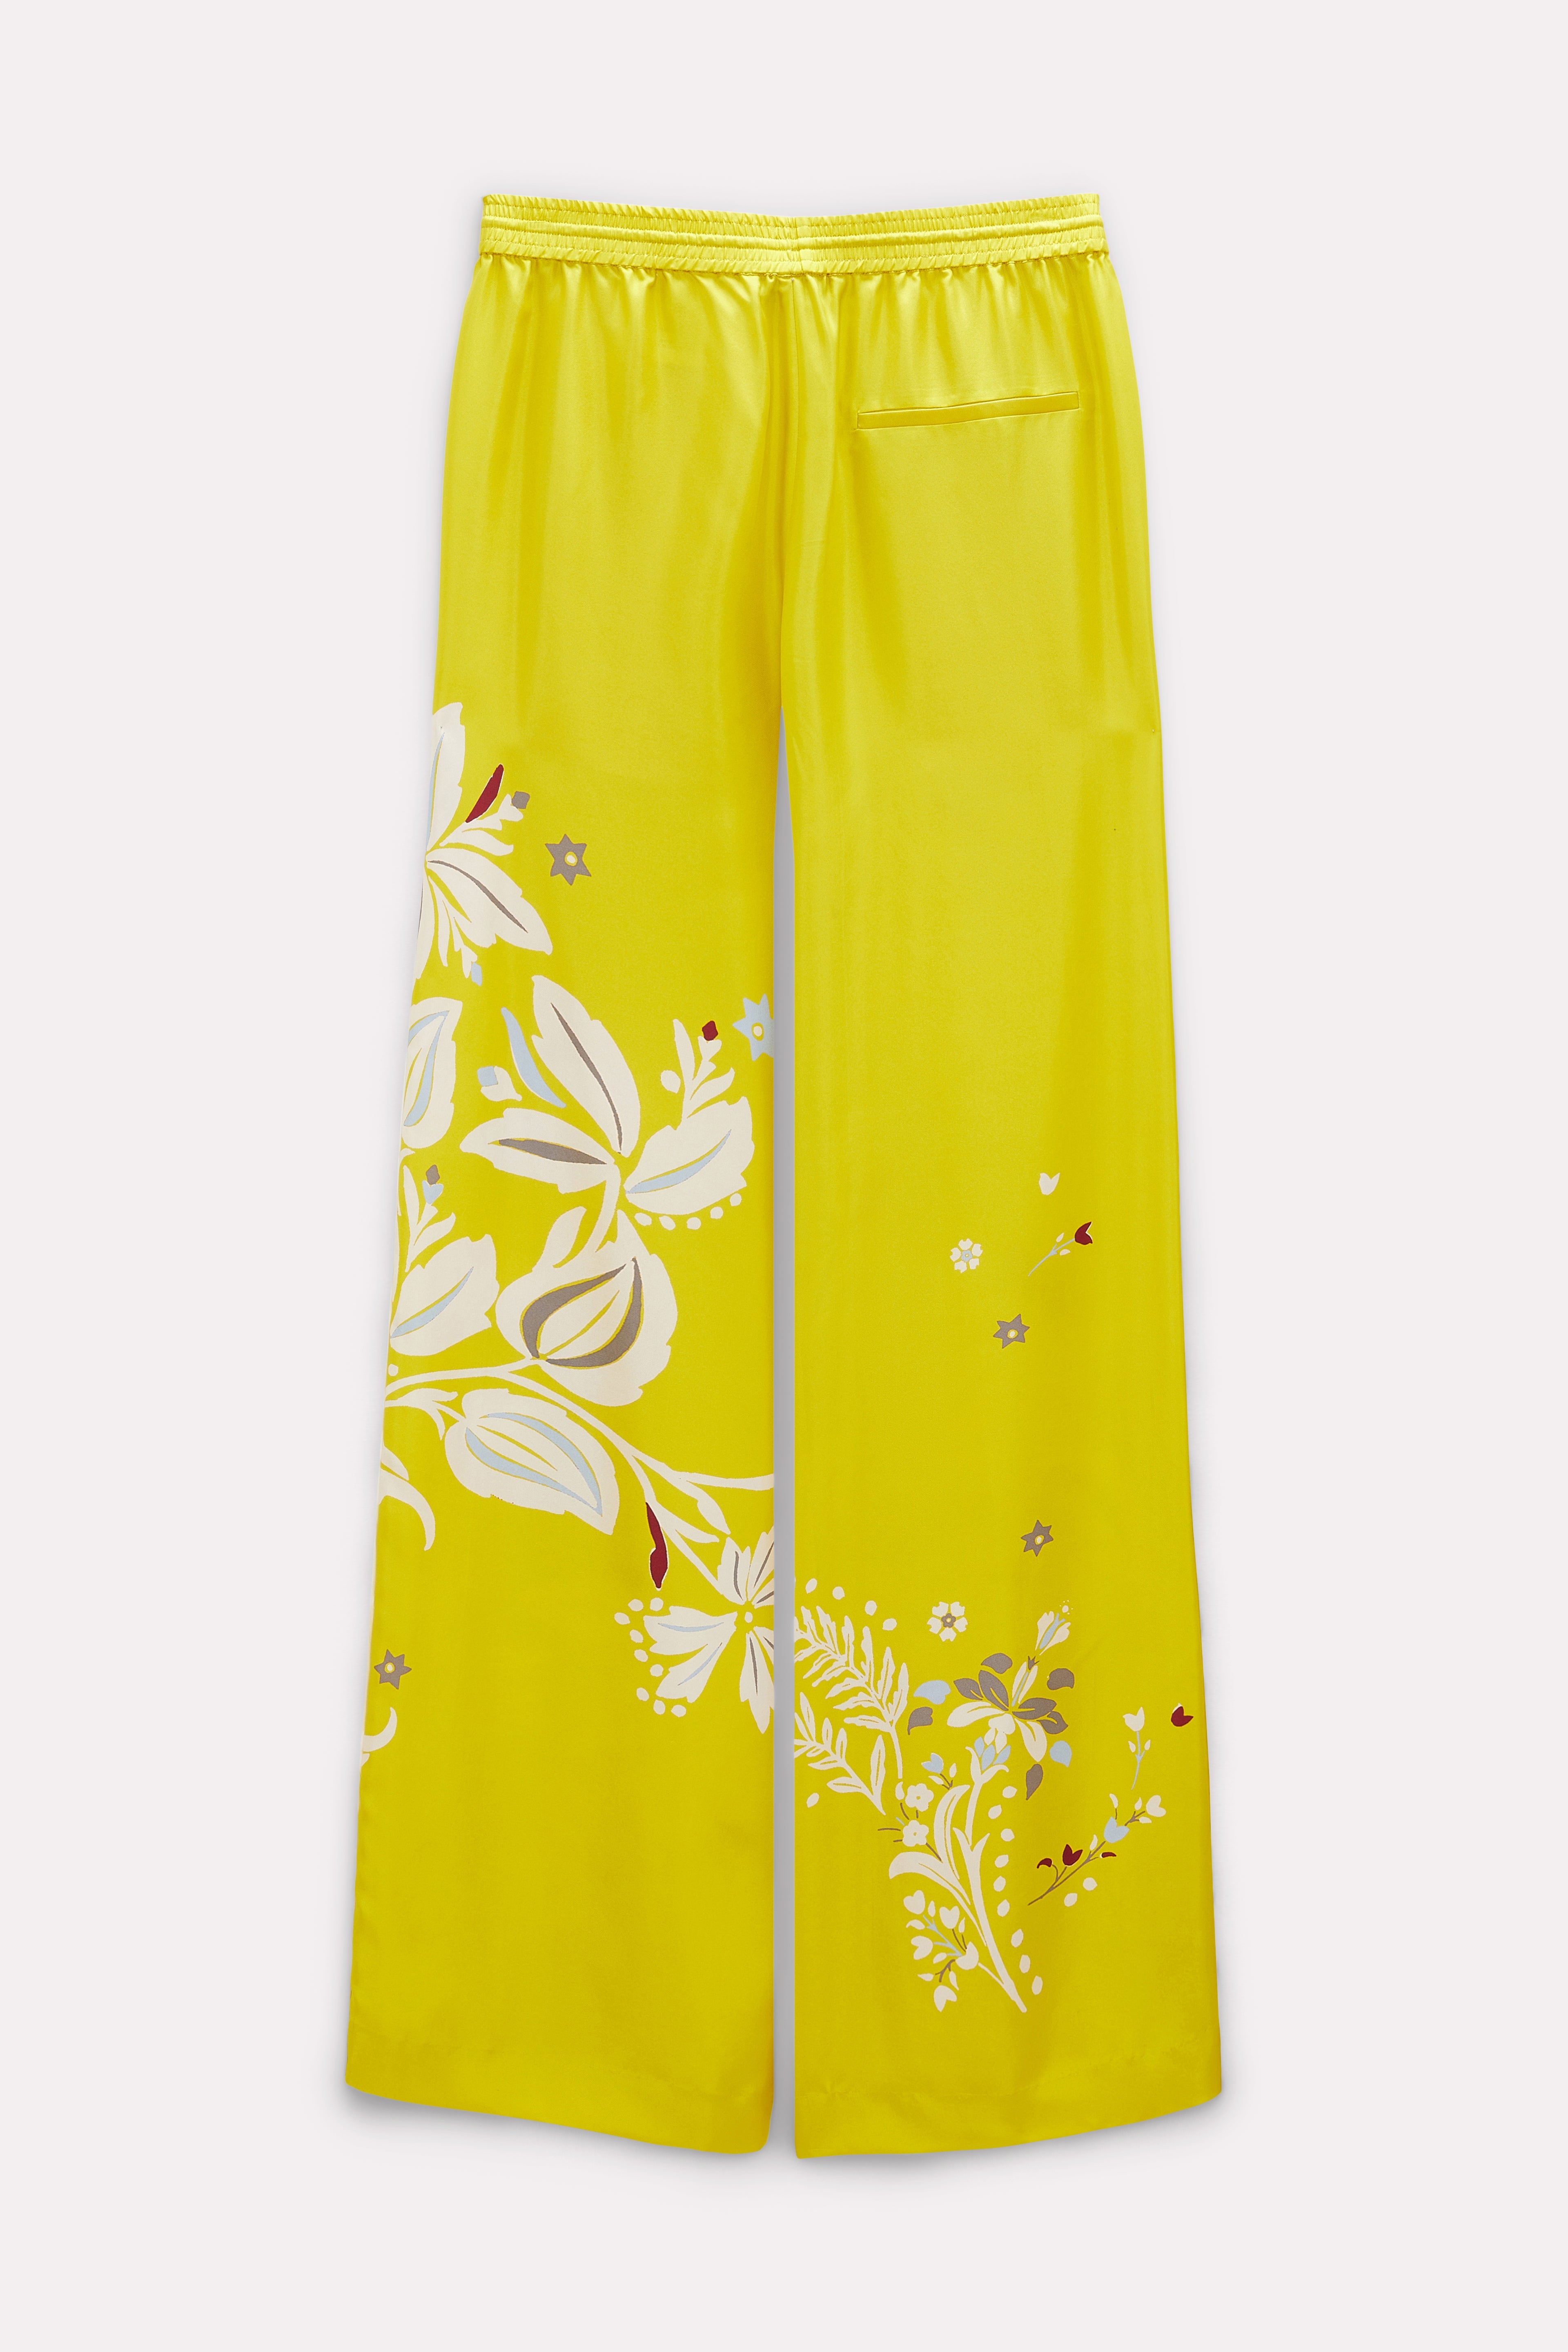 Dorothee-Schumacher-OUTLET-SALE-FLOWER-WHIRL-pants-Hosen-ARCHIVE-COLLECTION-2.jpg